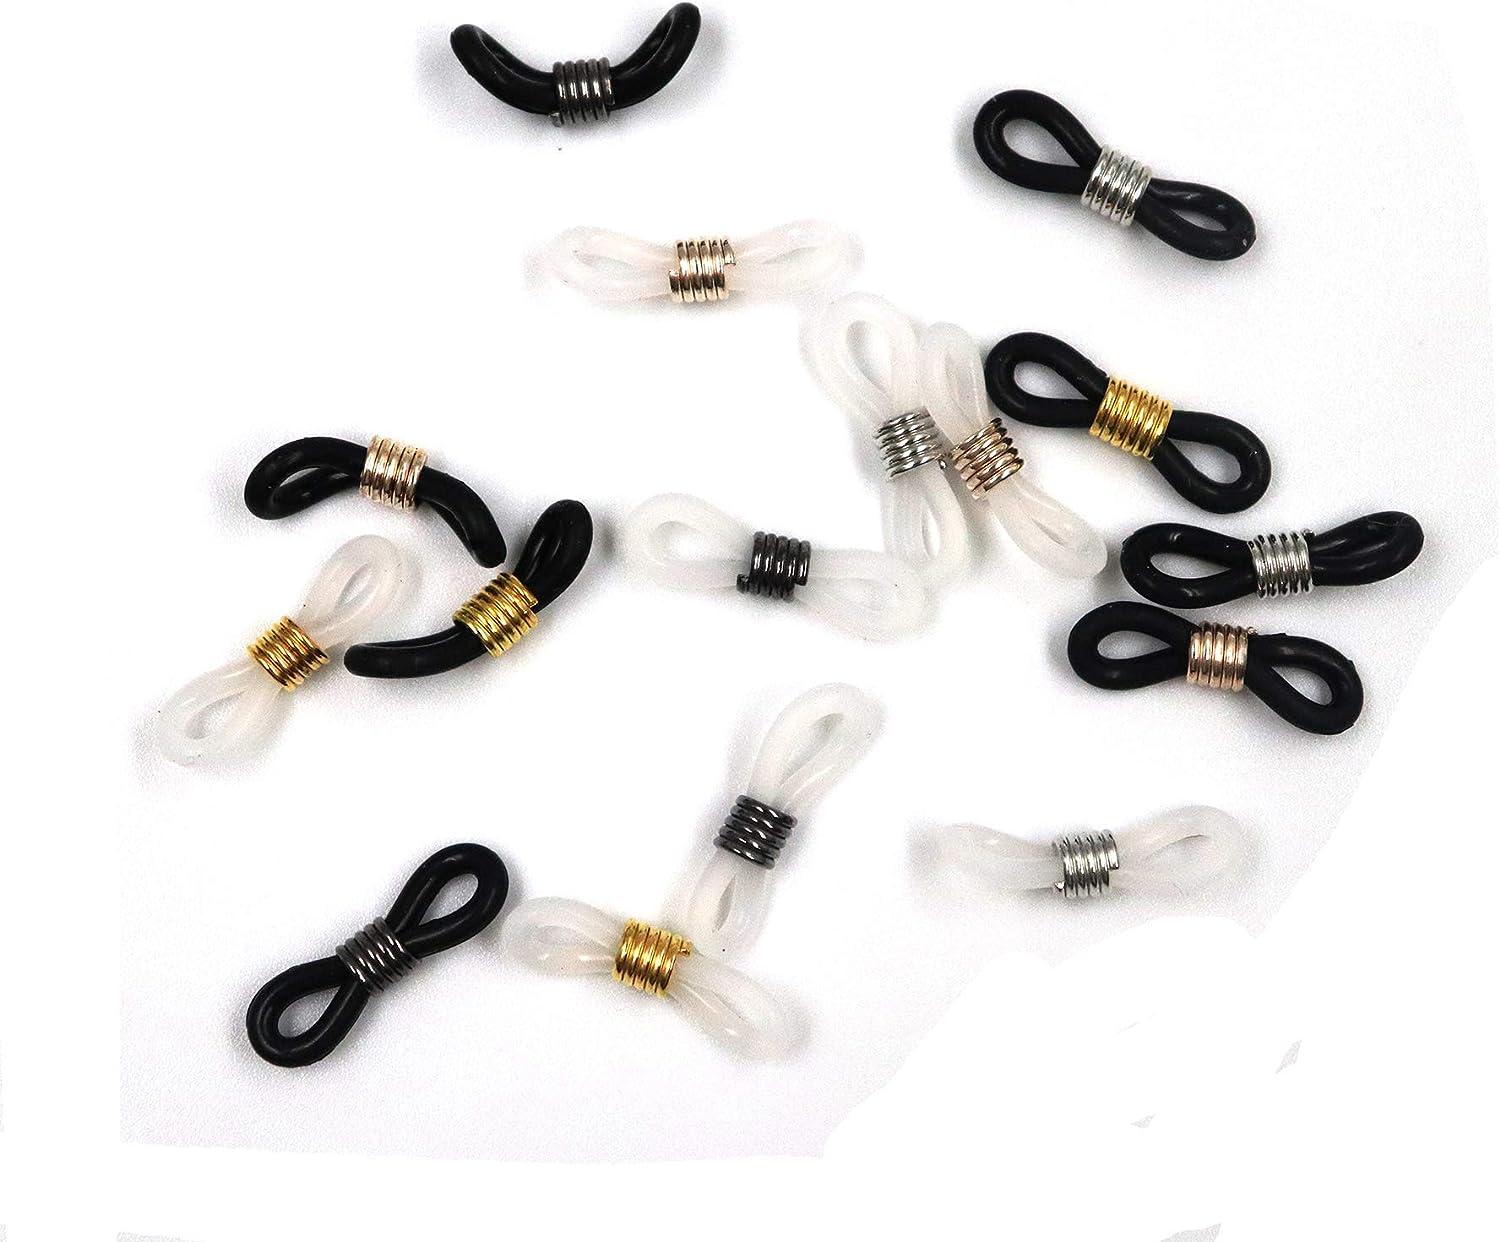 Ruwado 16 Pcs Eyeglass Chain Ends Silicone Adjustable Anti-Slip Rubber  Connectors Eyeglass Strap Retainer Chain Holder Loops for Sunglasses Sports Eyeglasses  Necklace Chain